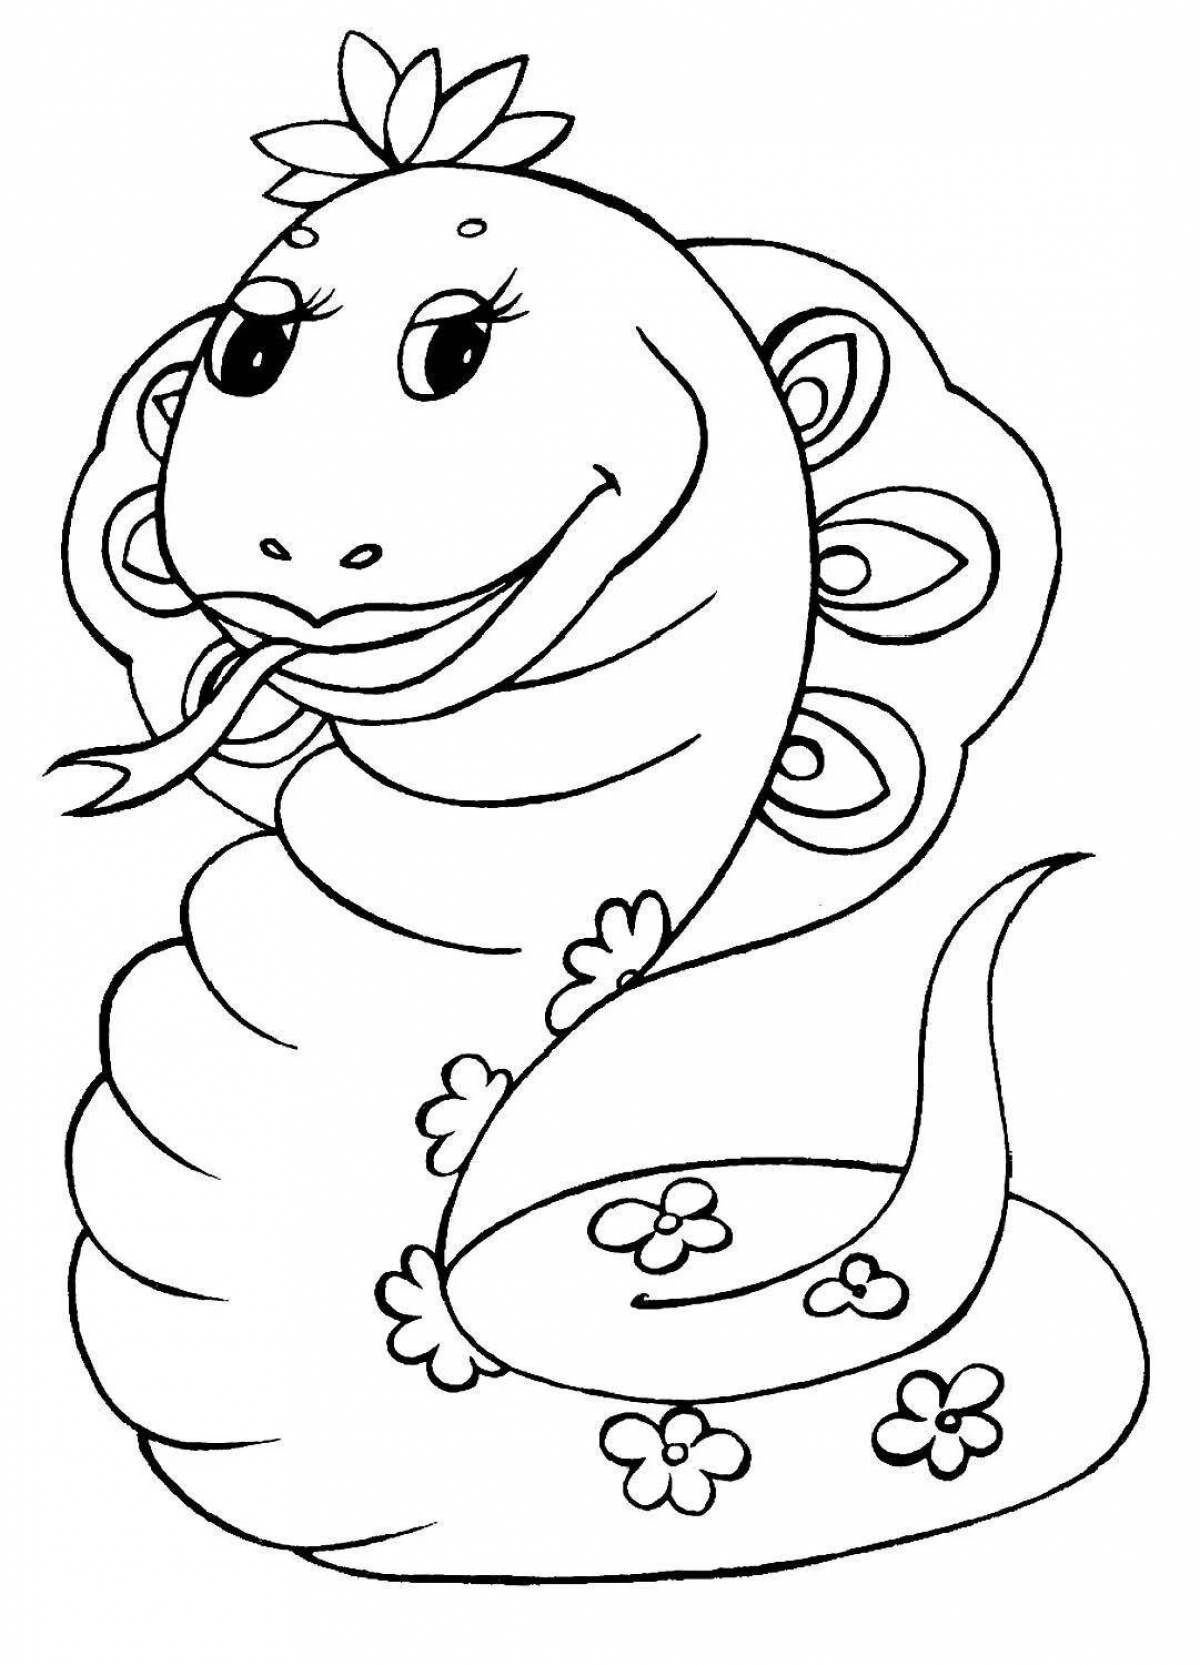 Great Budge blue snake coloring book